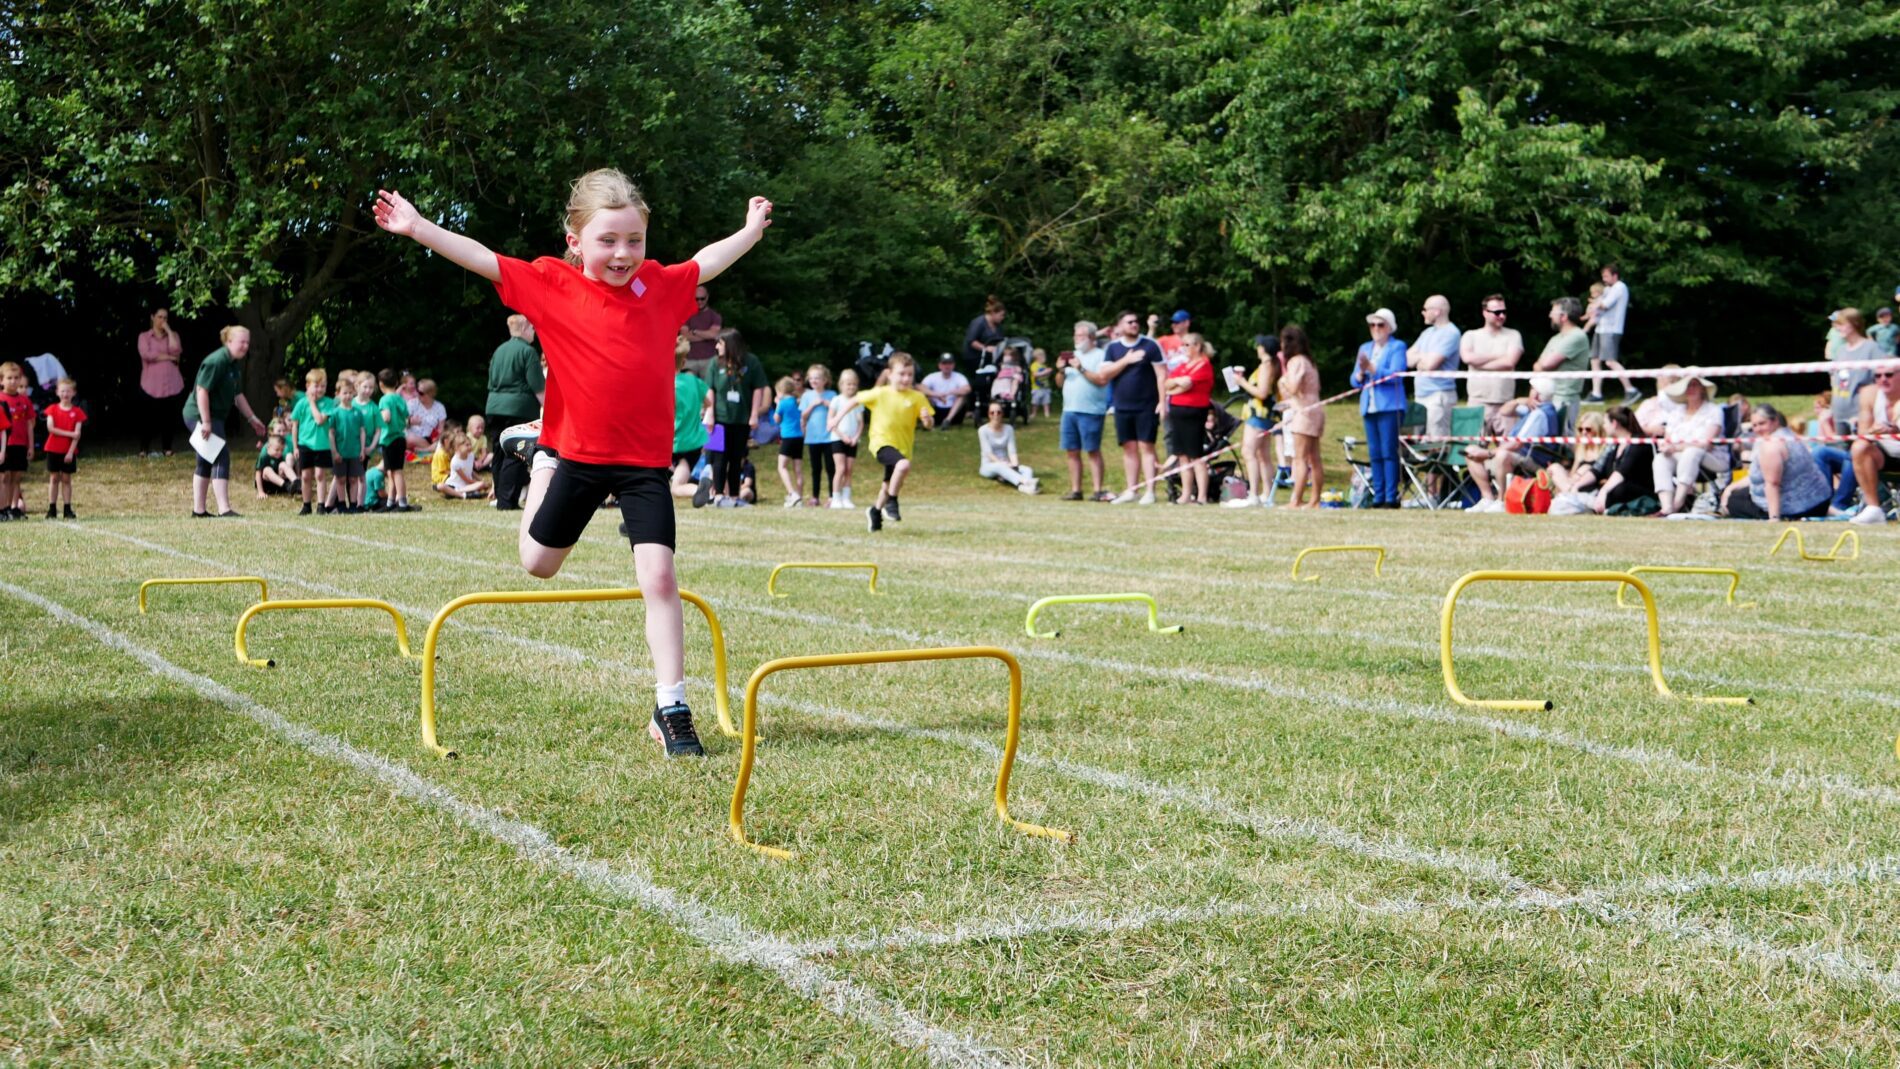 physical education with a girl jumping over hurdles at sports day